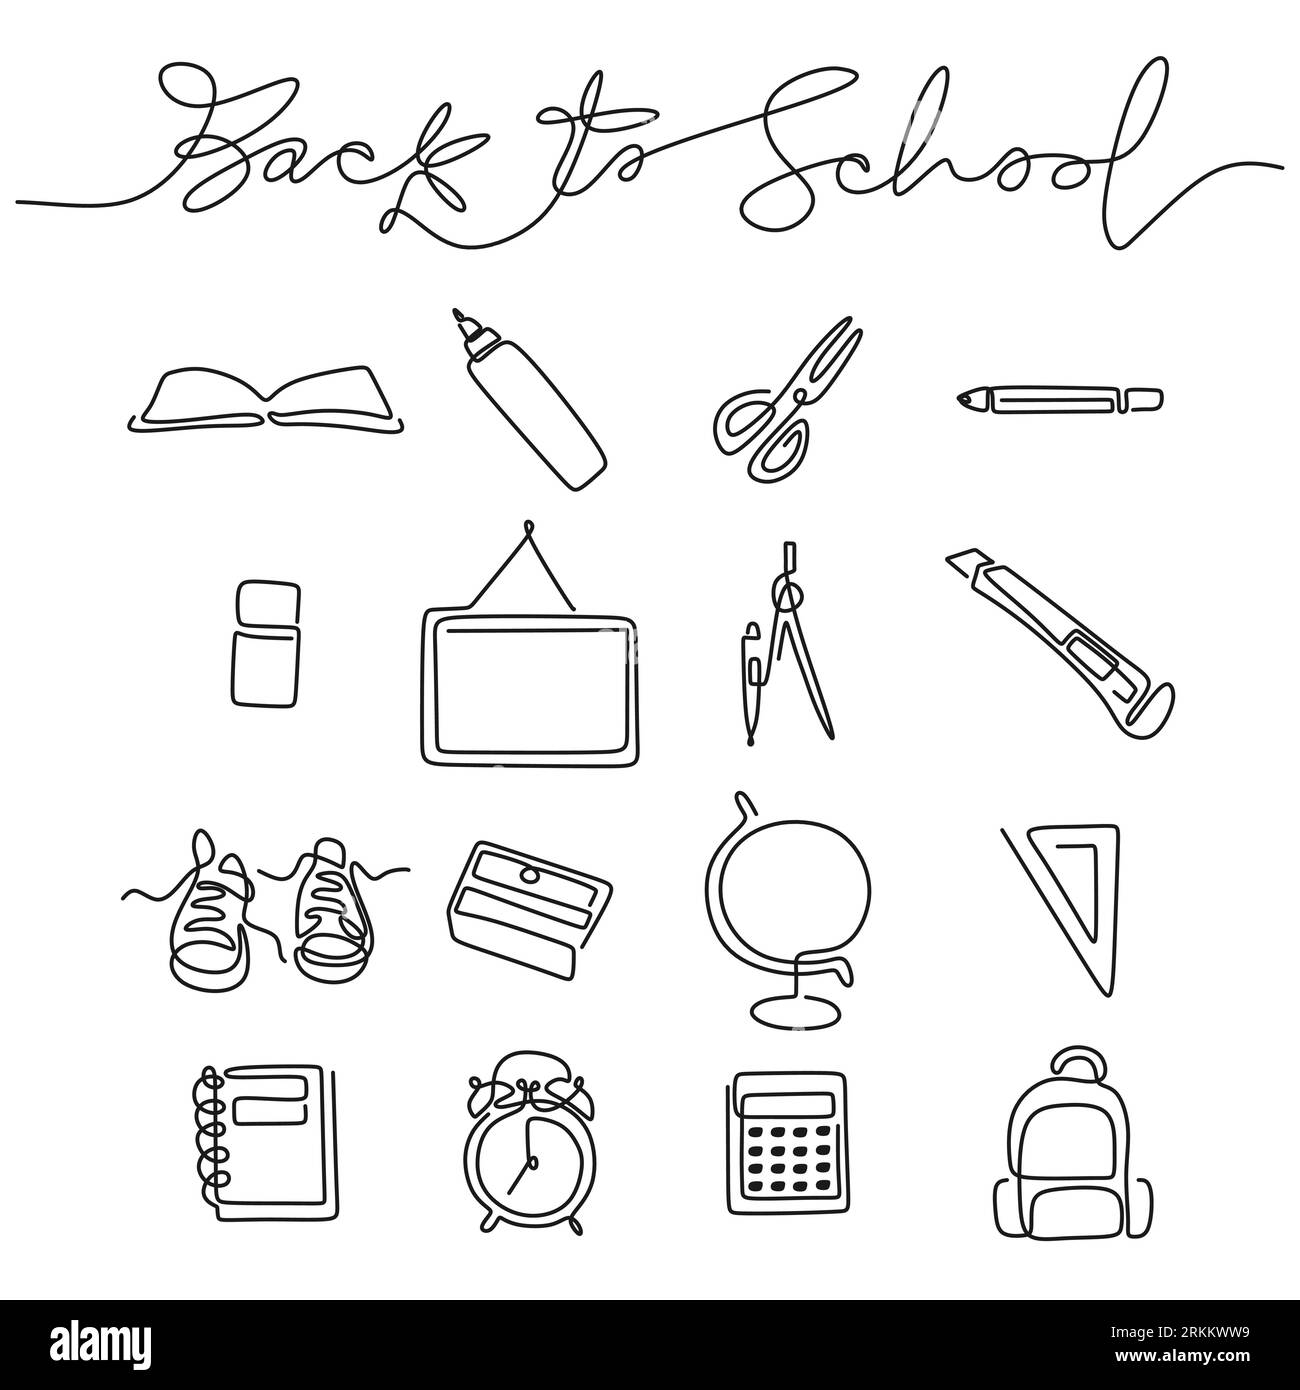 Continuous one line drawing of back to school handwritten words with note book, pencil, book, board, scissor, cutter, calipers, shoes, bag, calculator Stock Vector